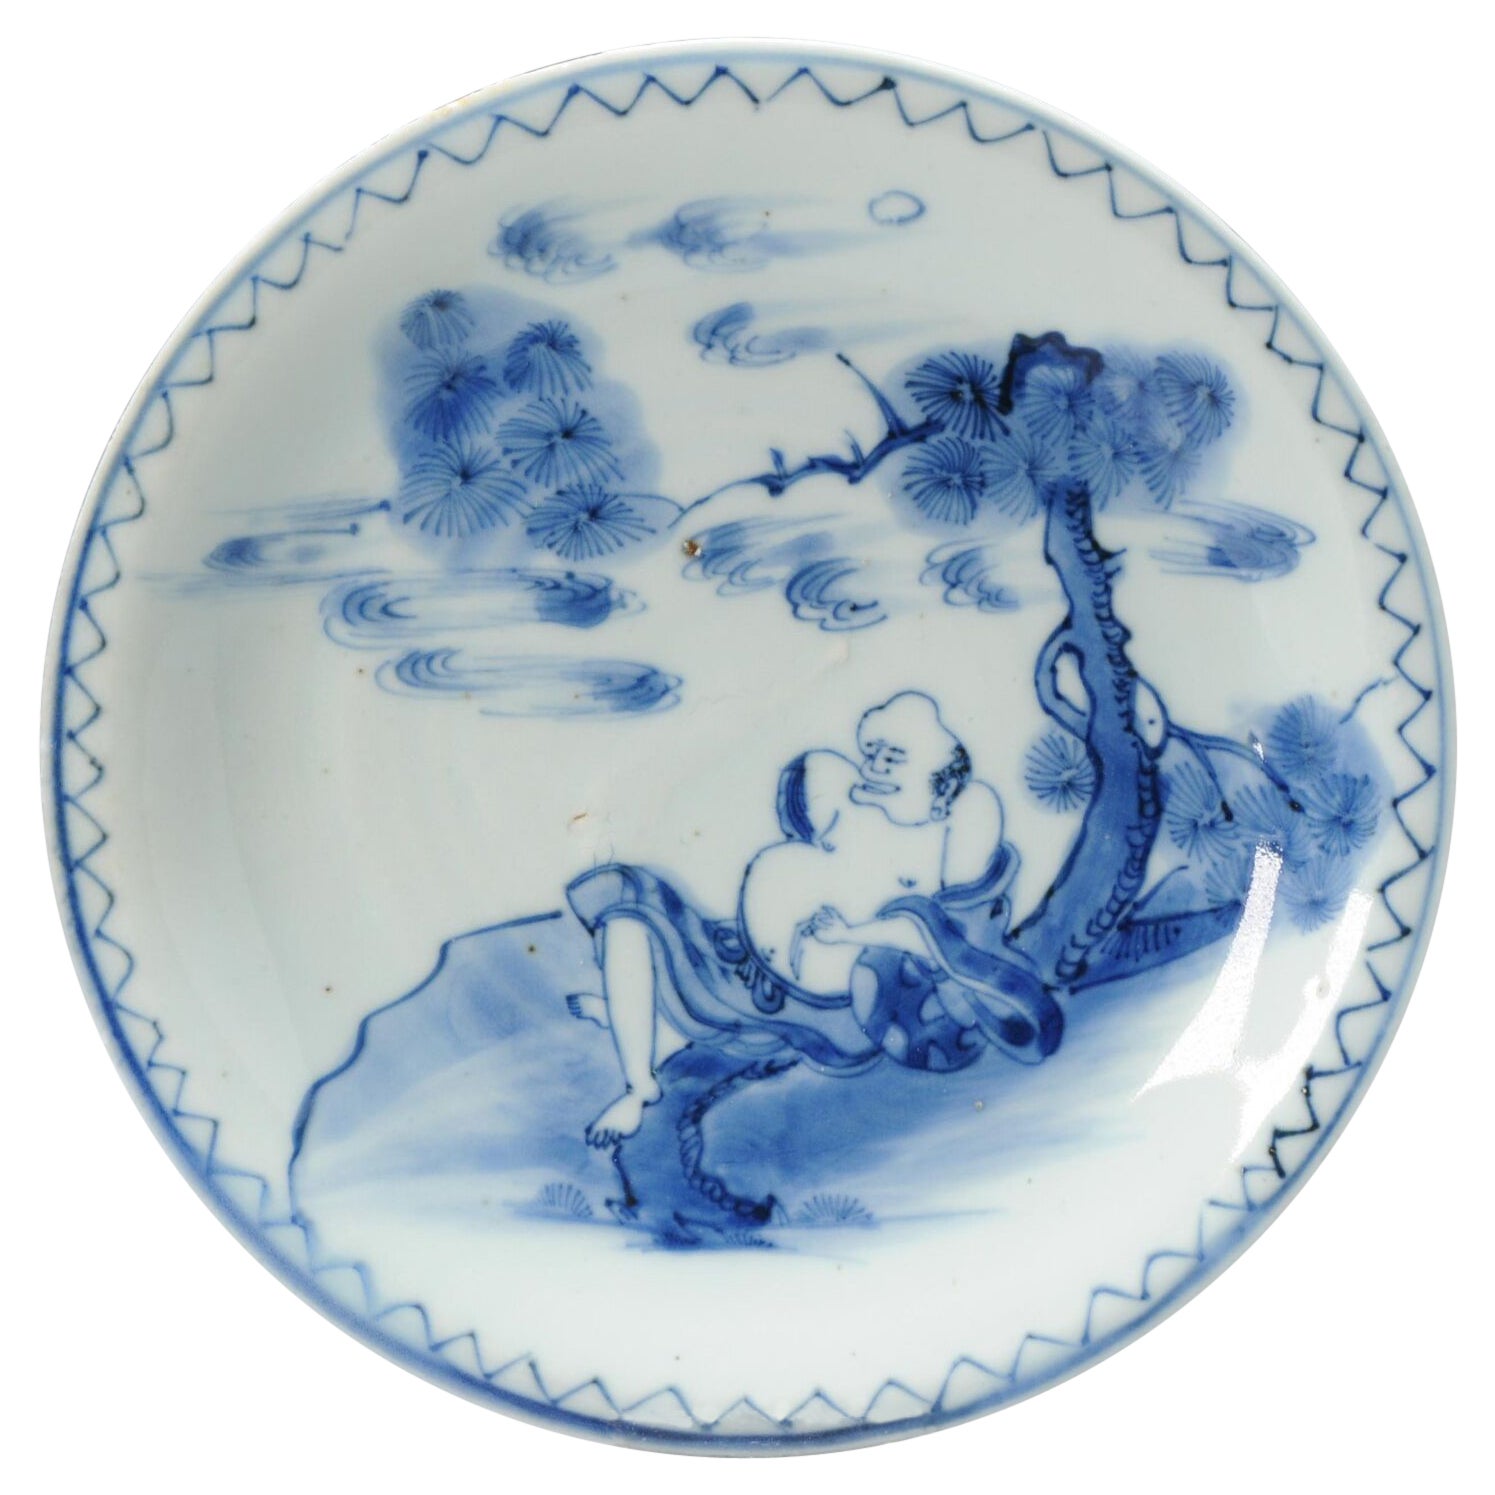 Rare Chinese Porcelain Ming Period Kosometsuke Plate Arhat, ca 1600-1640 For Sale